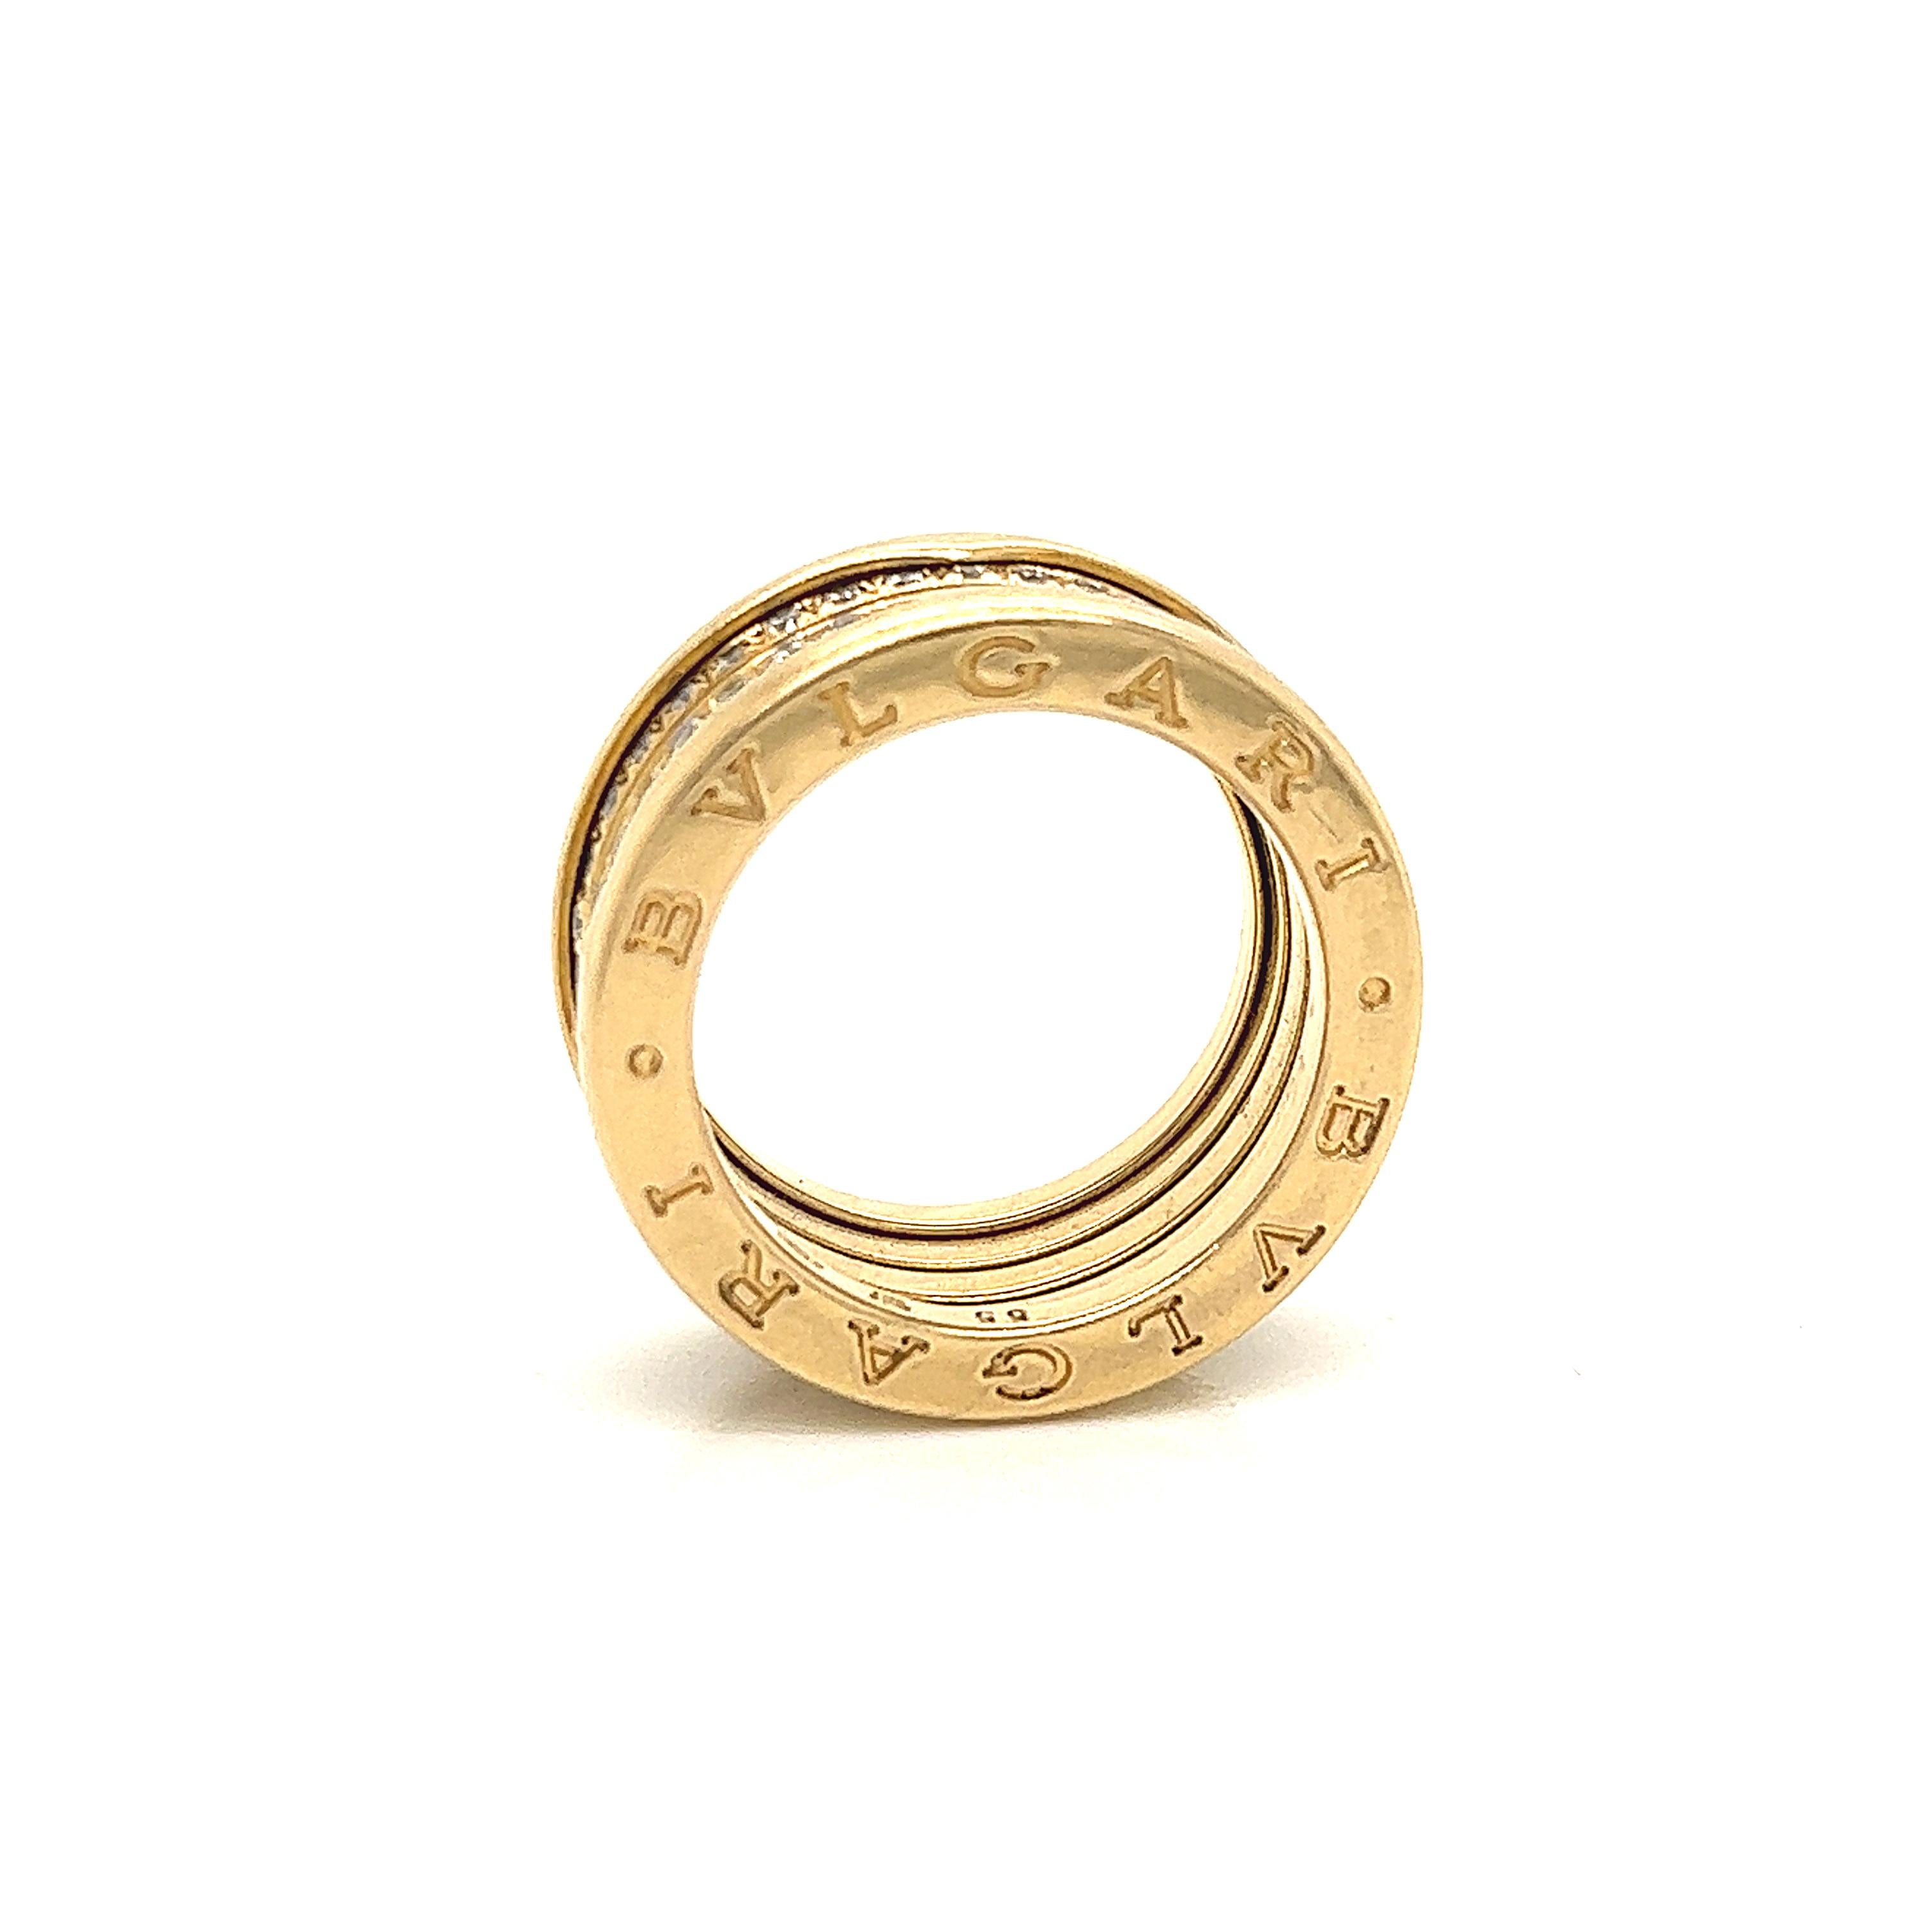 Very popular and in demand ring from Bvlgari. The collection is known as the B Zero 1. This ring is crafted in 18k yellow gold and shows a flexible design with three rows of diamonds set in the center.  The diamonds in the design weigh approximately